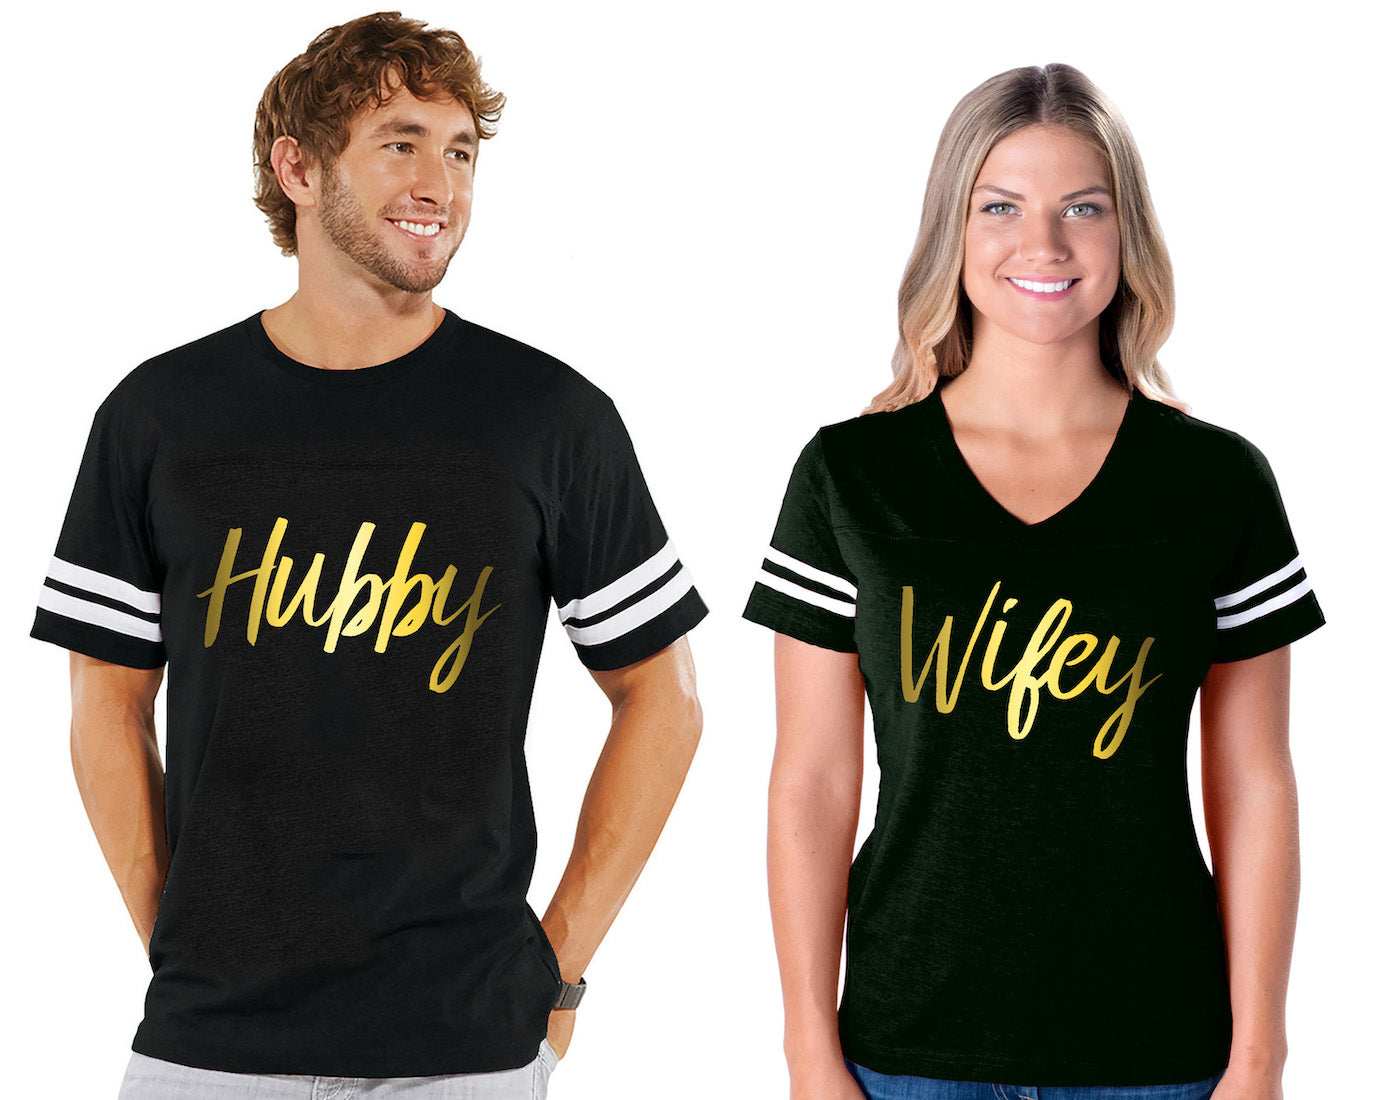 Hubby & Wifey - Couple Cotton Jerseys – Couples Apparel